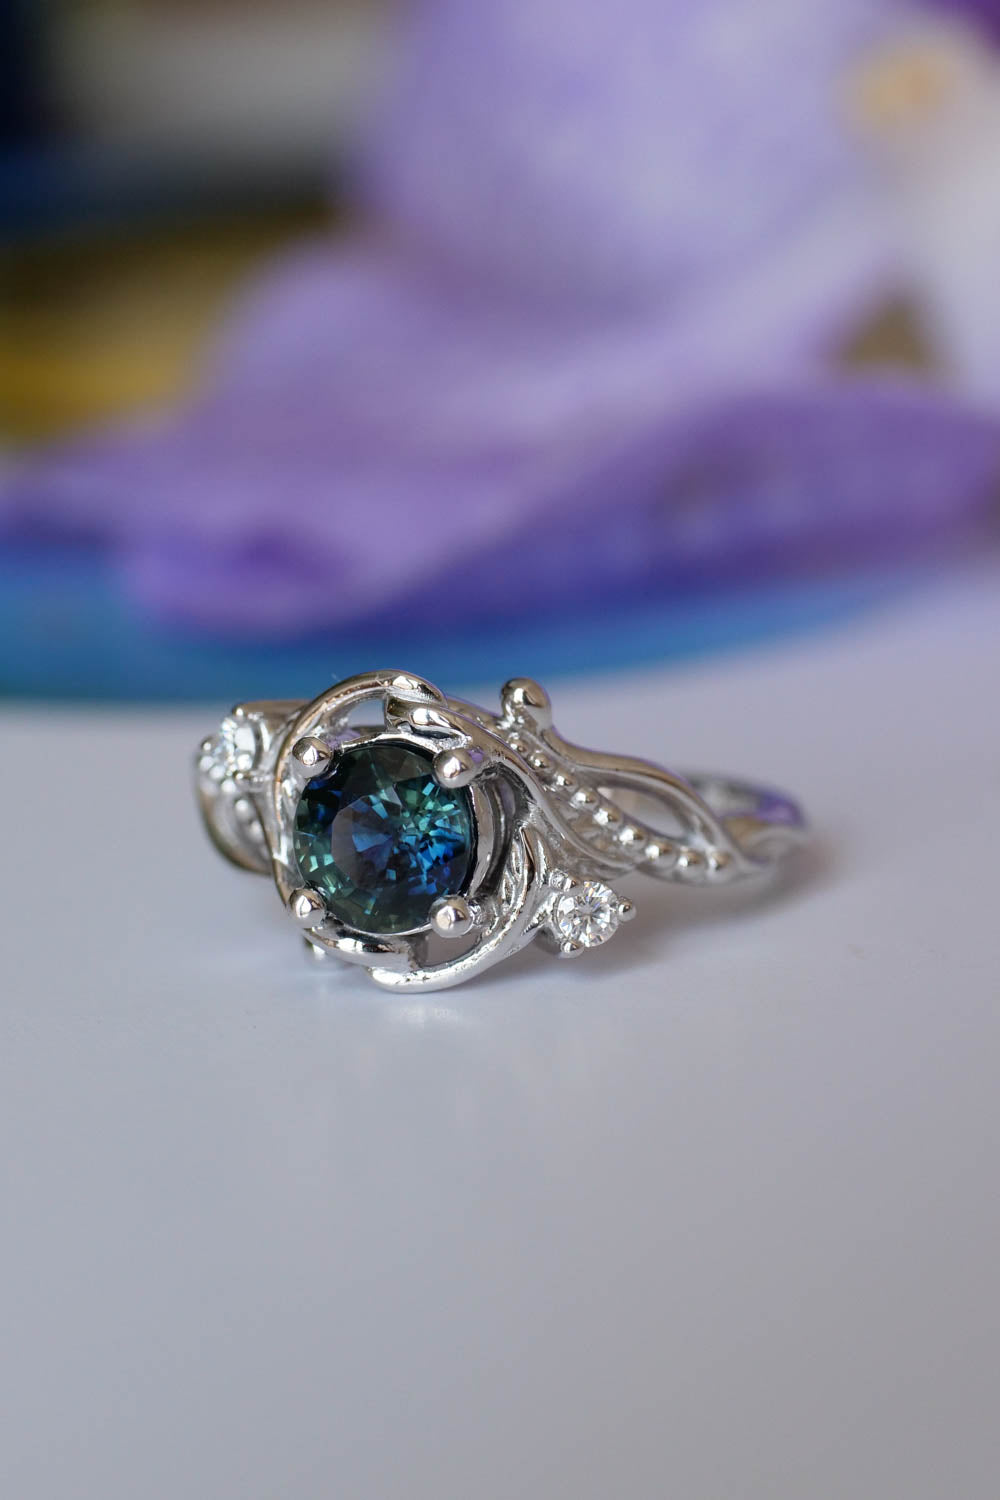 Genuine teal sapphire engagement ring set, white gold bridal ring set with sapphire and diamonds / Undina - Eden Garden Jewelry™